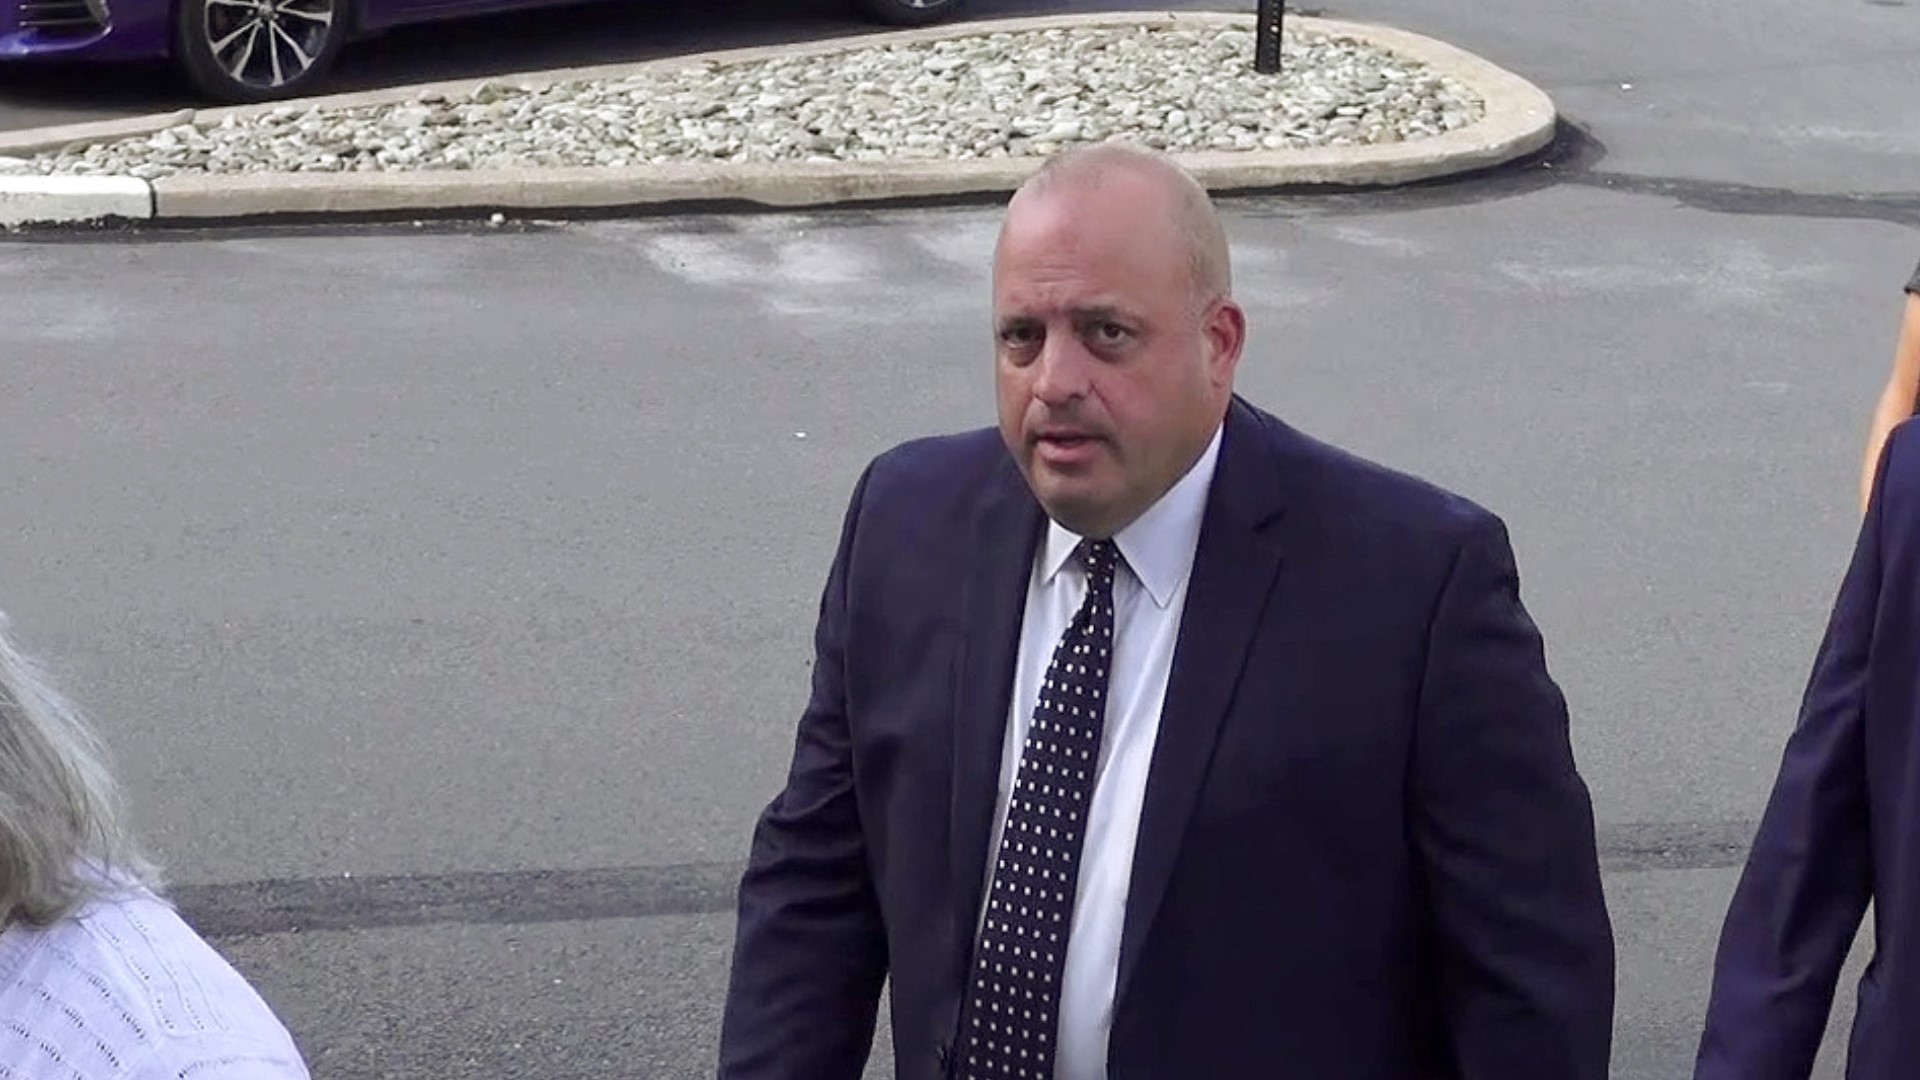 A Lackawanna County attorney is facing serious charges after some of his alleged clients came forward, accusing him of inappropriate contact.